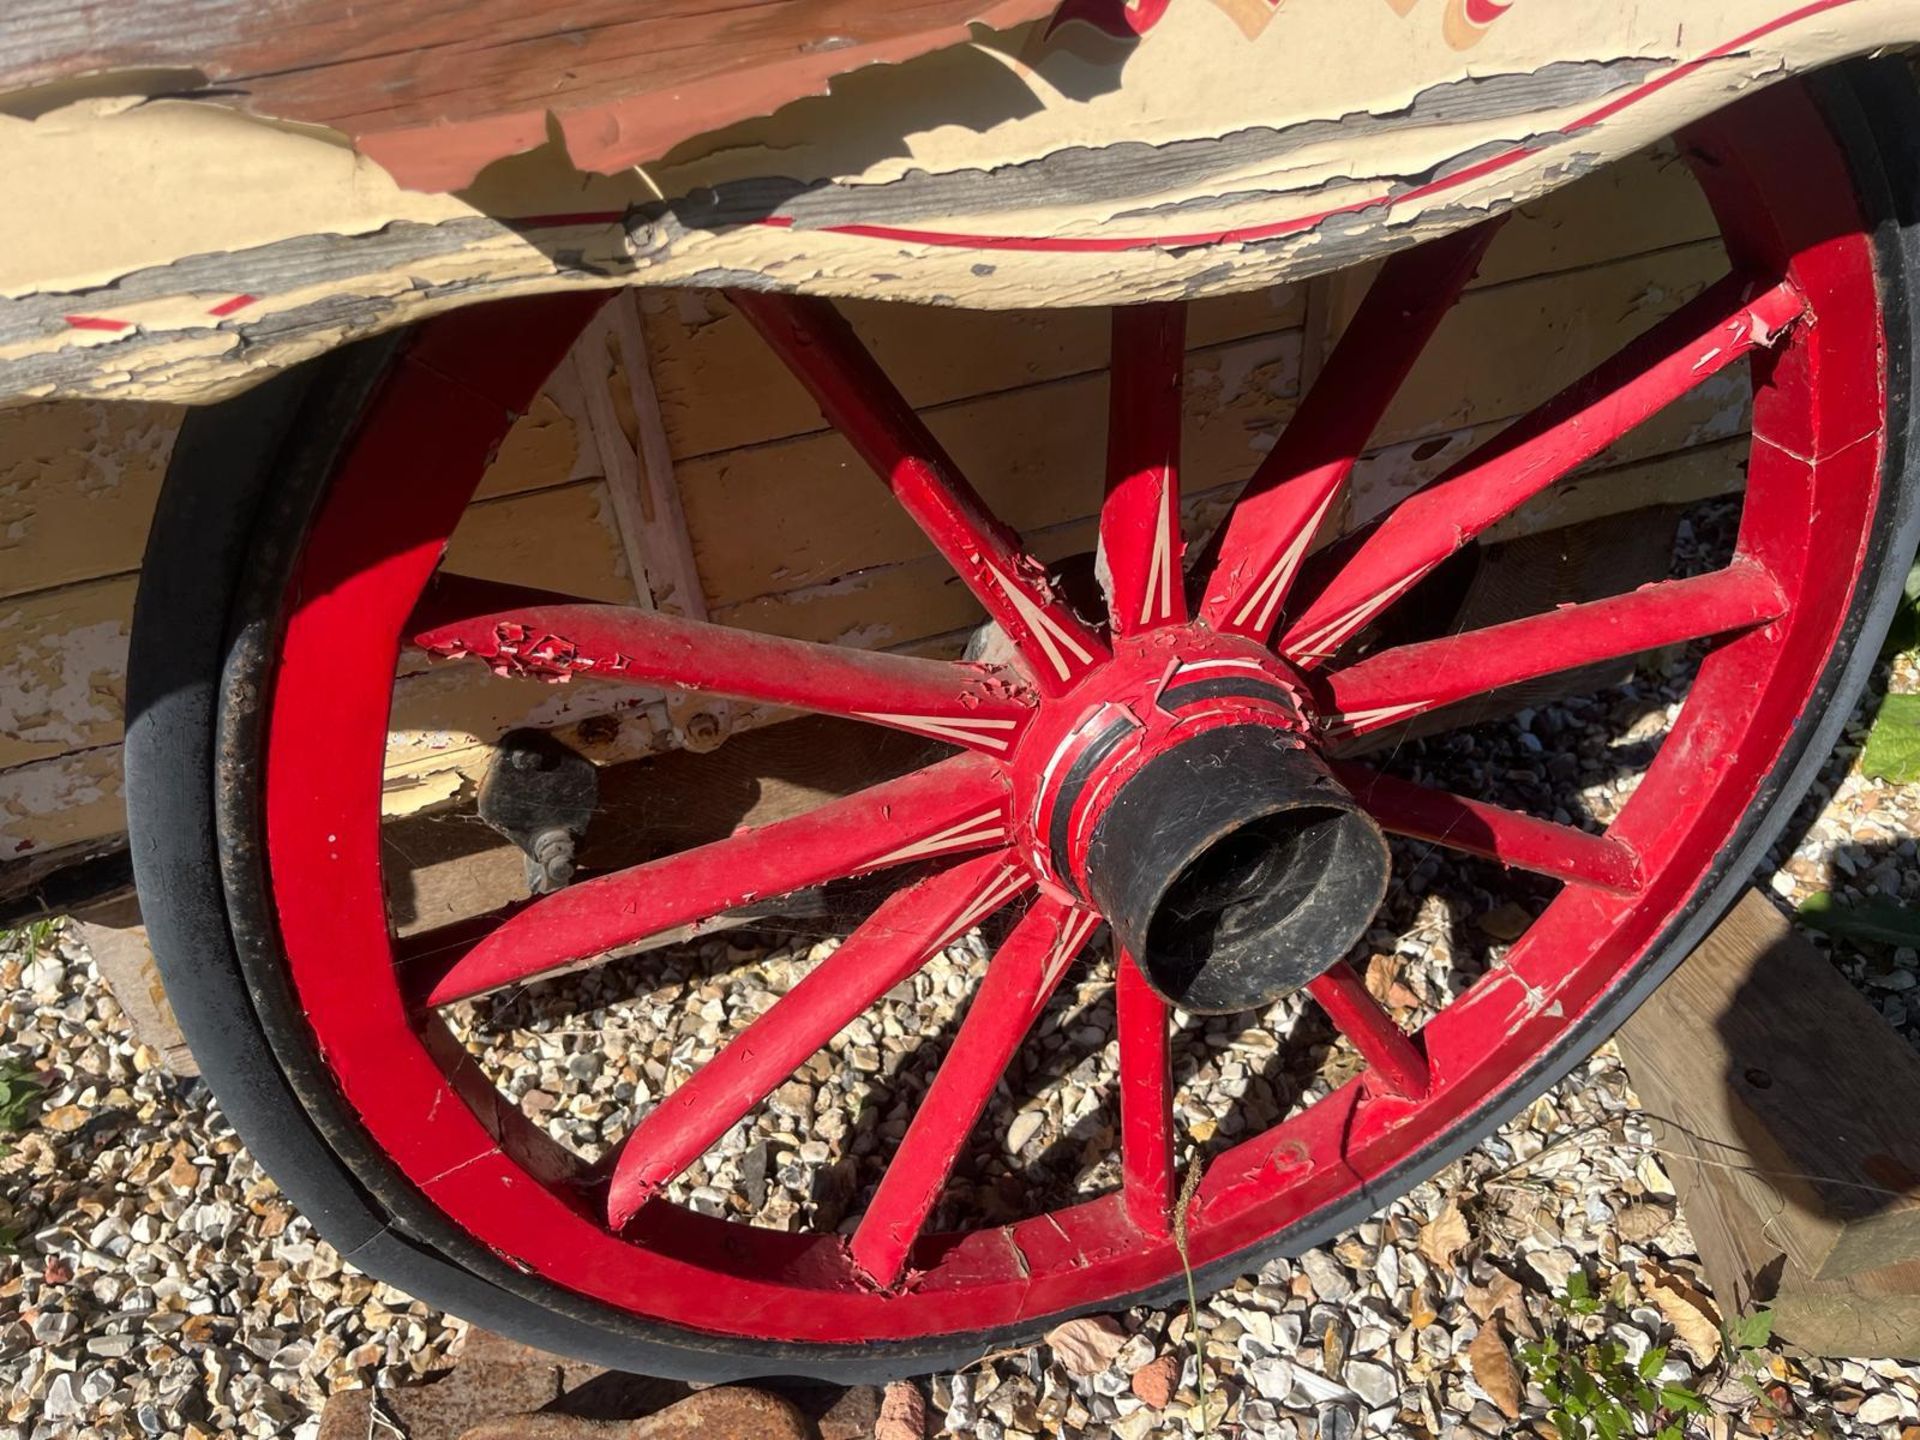 ICE CREAM VAN, a two-wheeled vehicle with rubber tyred wheels painted red. - Image 3 of 6